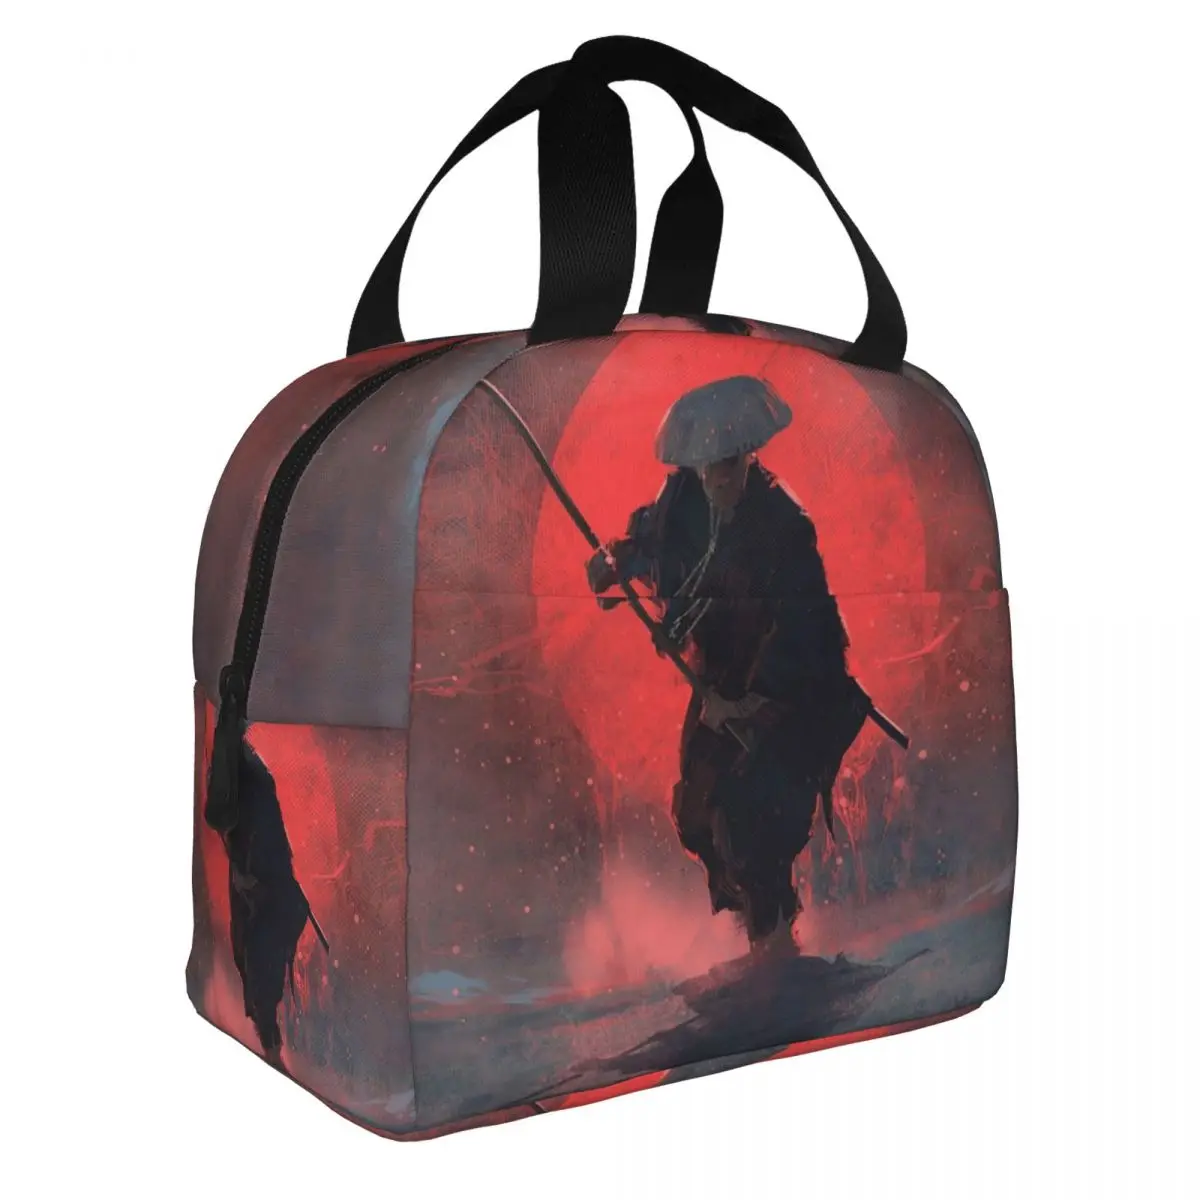 Fantasy - Samurai Lunch Bento Bags Portable Aluminum Foil thickened Thermal Cloth Lunch Bag for Women Men Boy